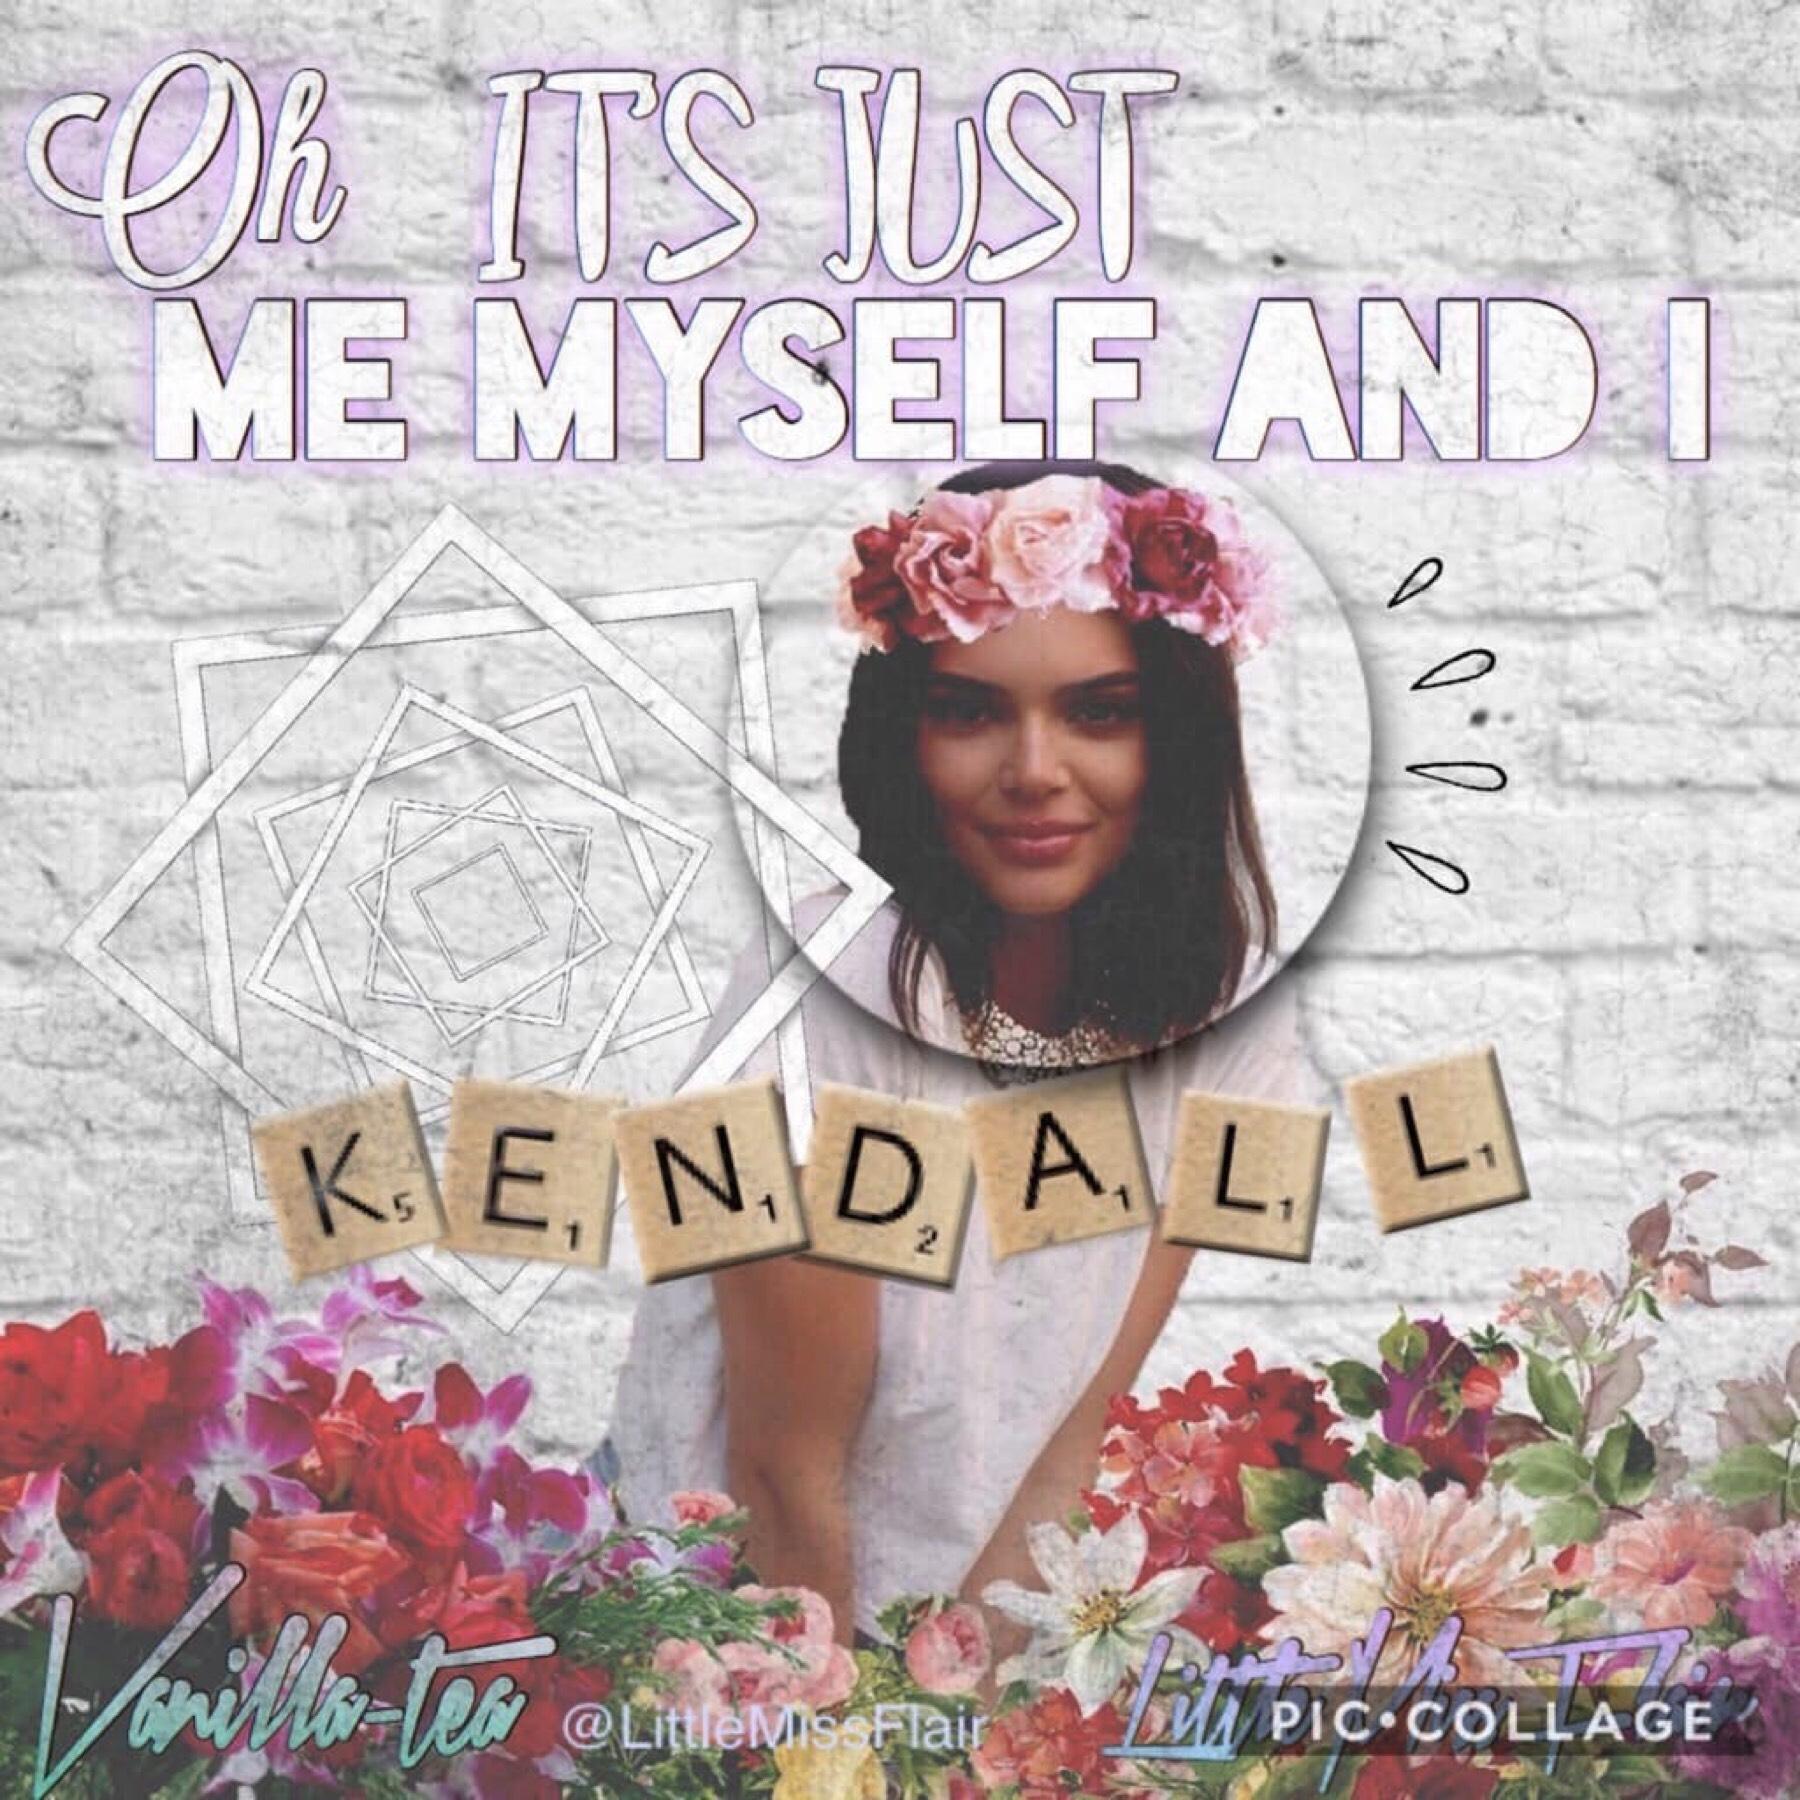 This is a collab with LittleMissFlair! 💗Go check out her account she’s amazing! This is my first edit I’ve posted since I’ve come back!!👍🏻